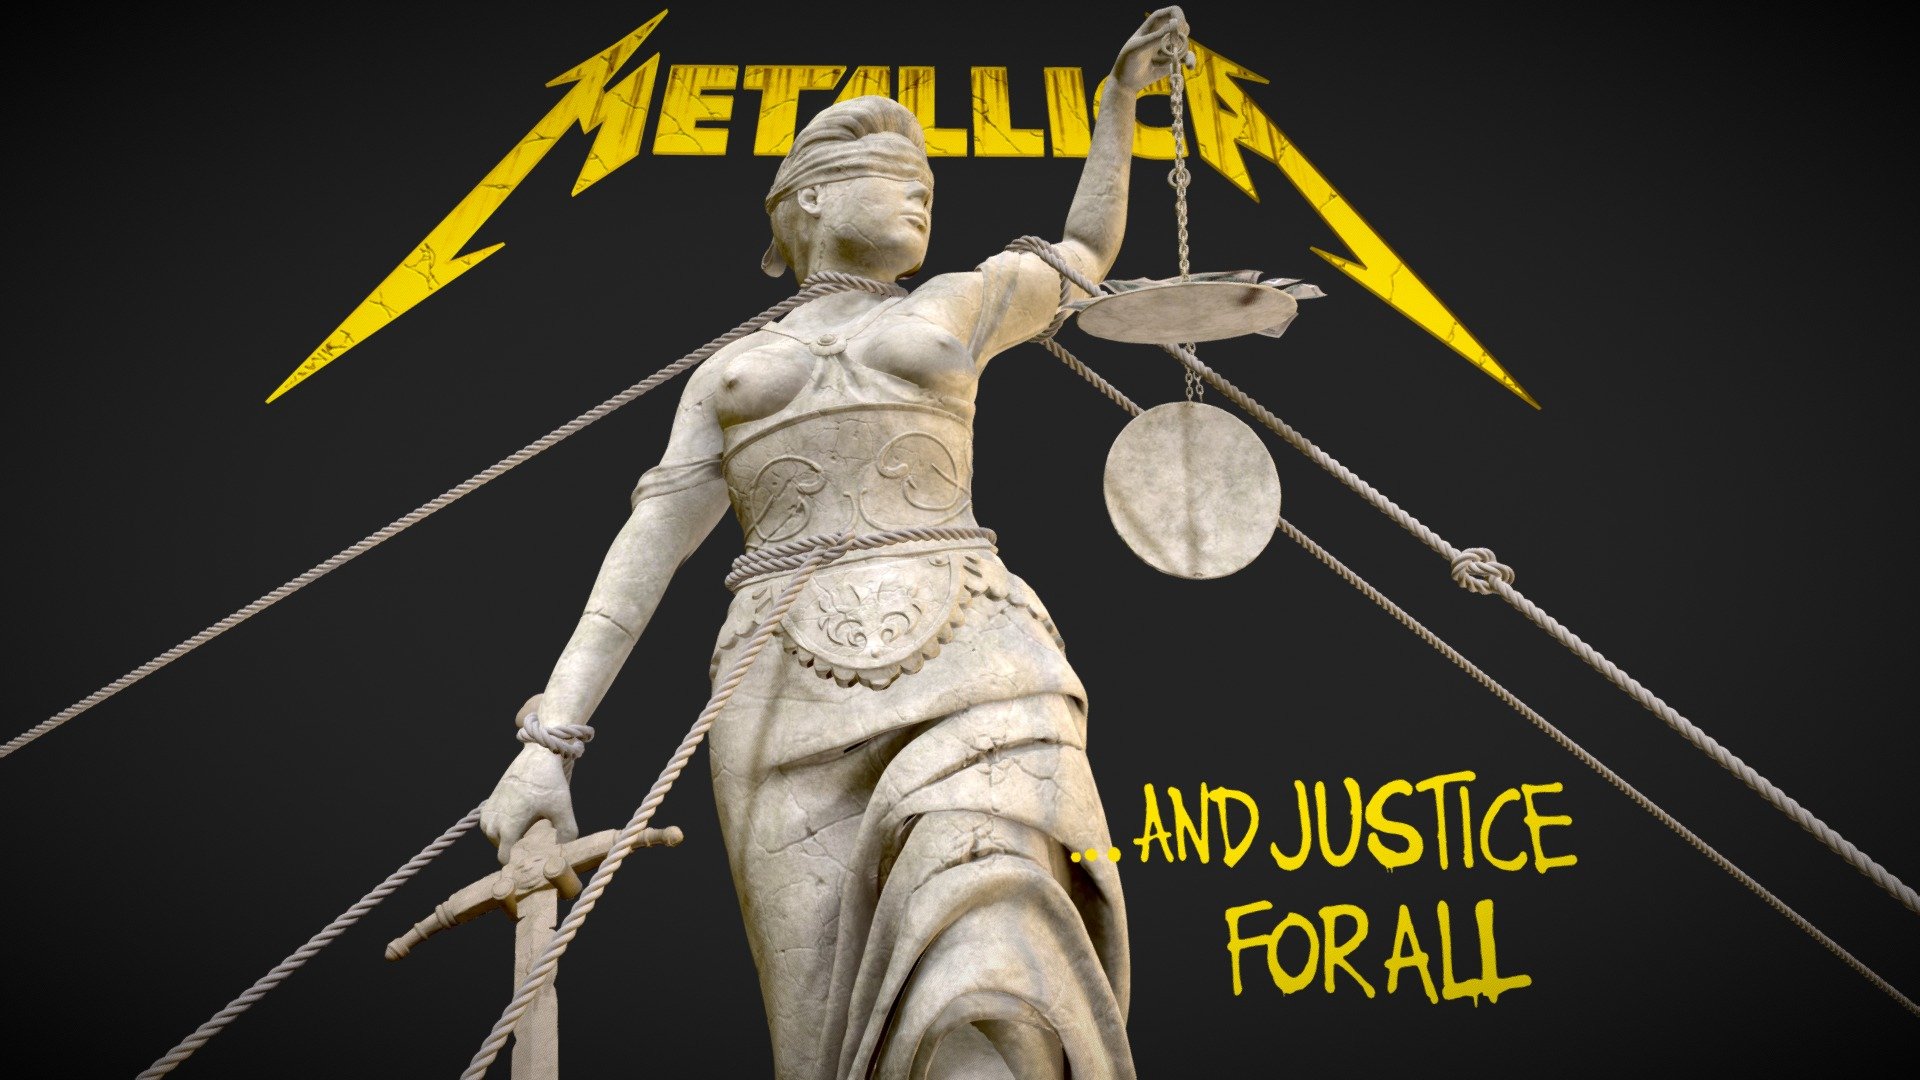 And Justice For All Banner by Nevermind0309 on DeviantArt